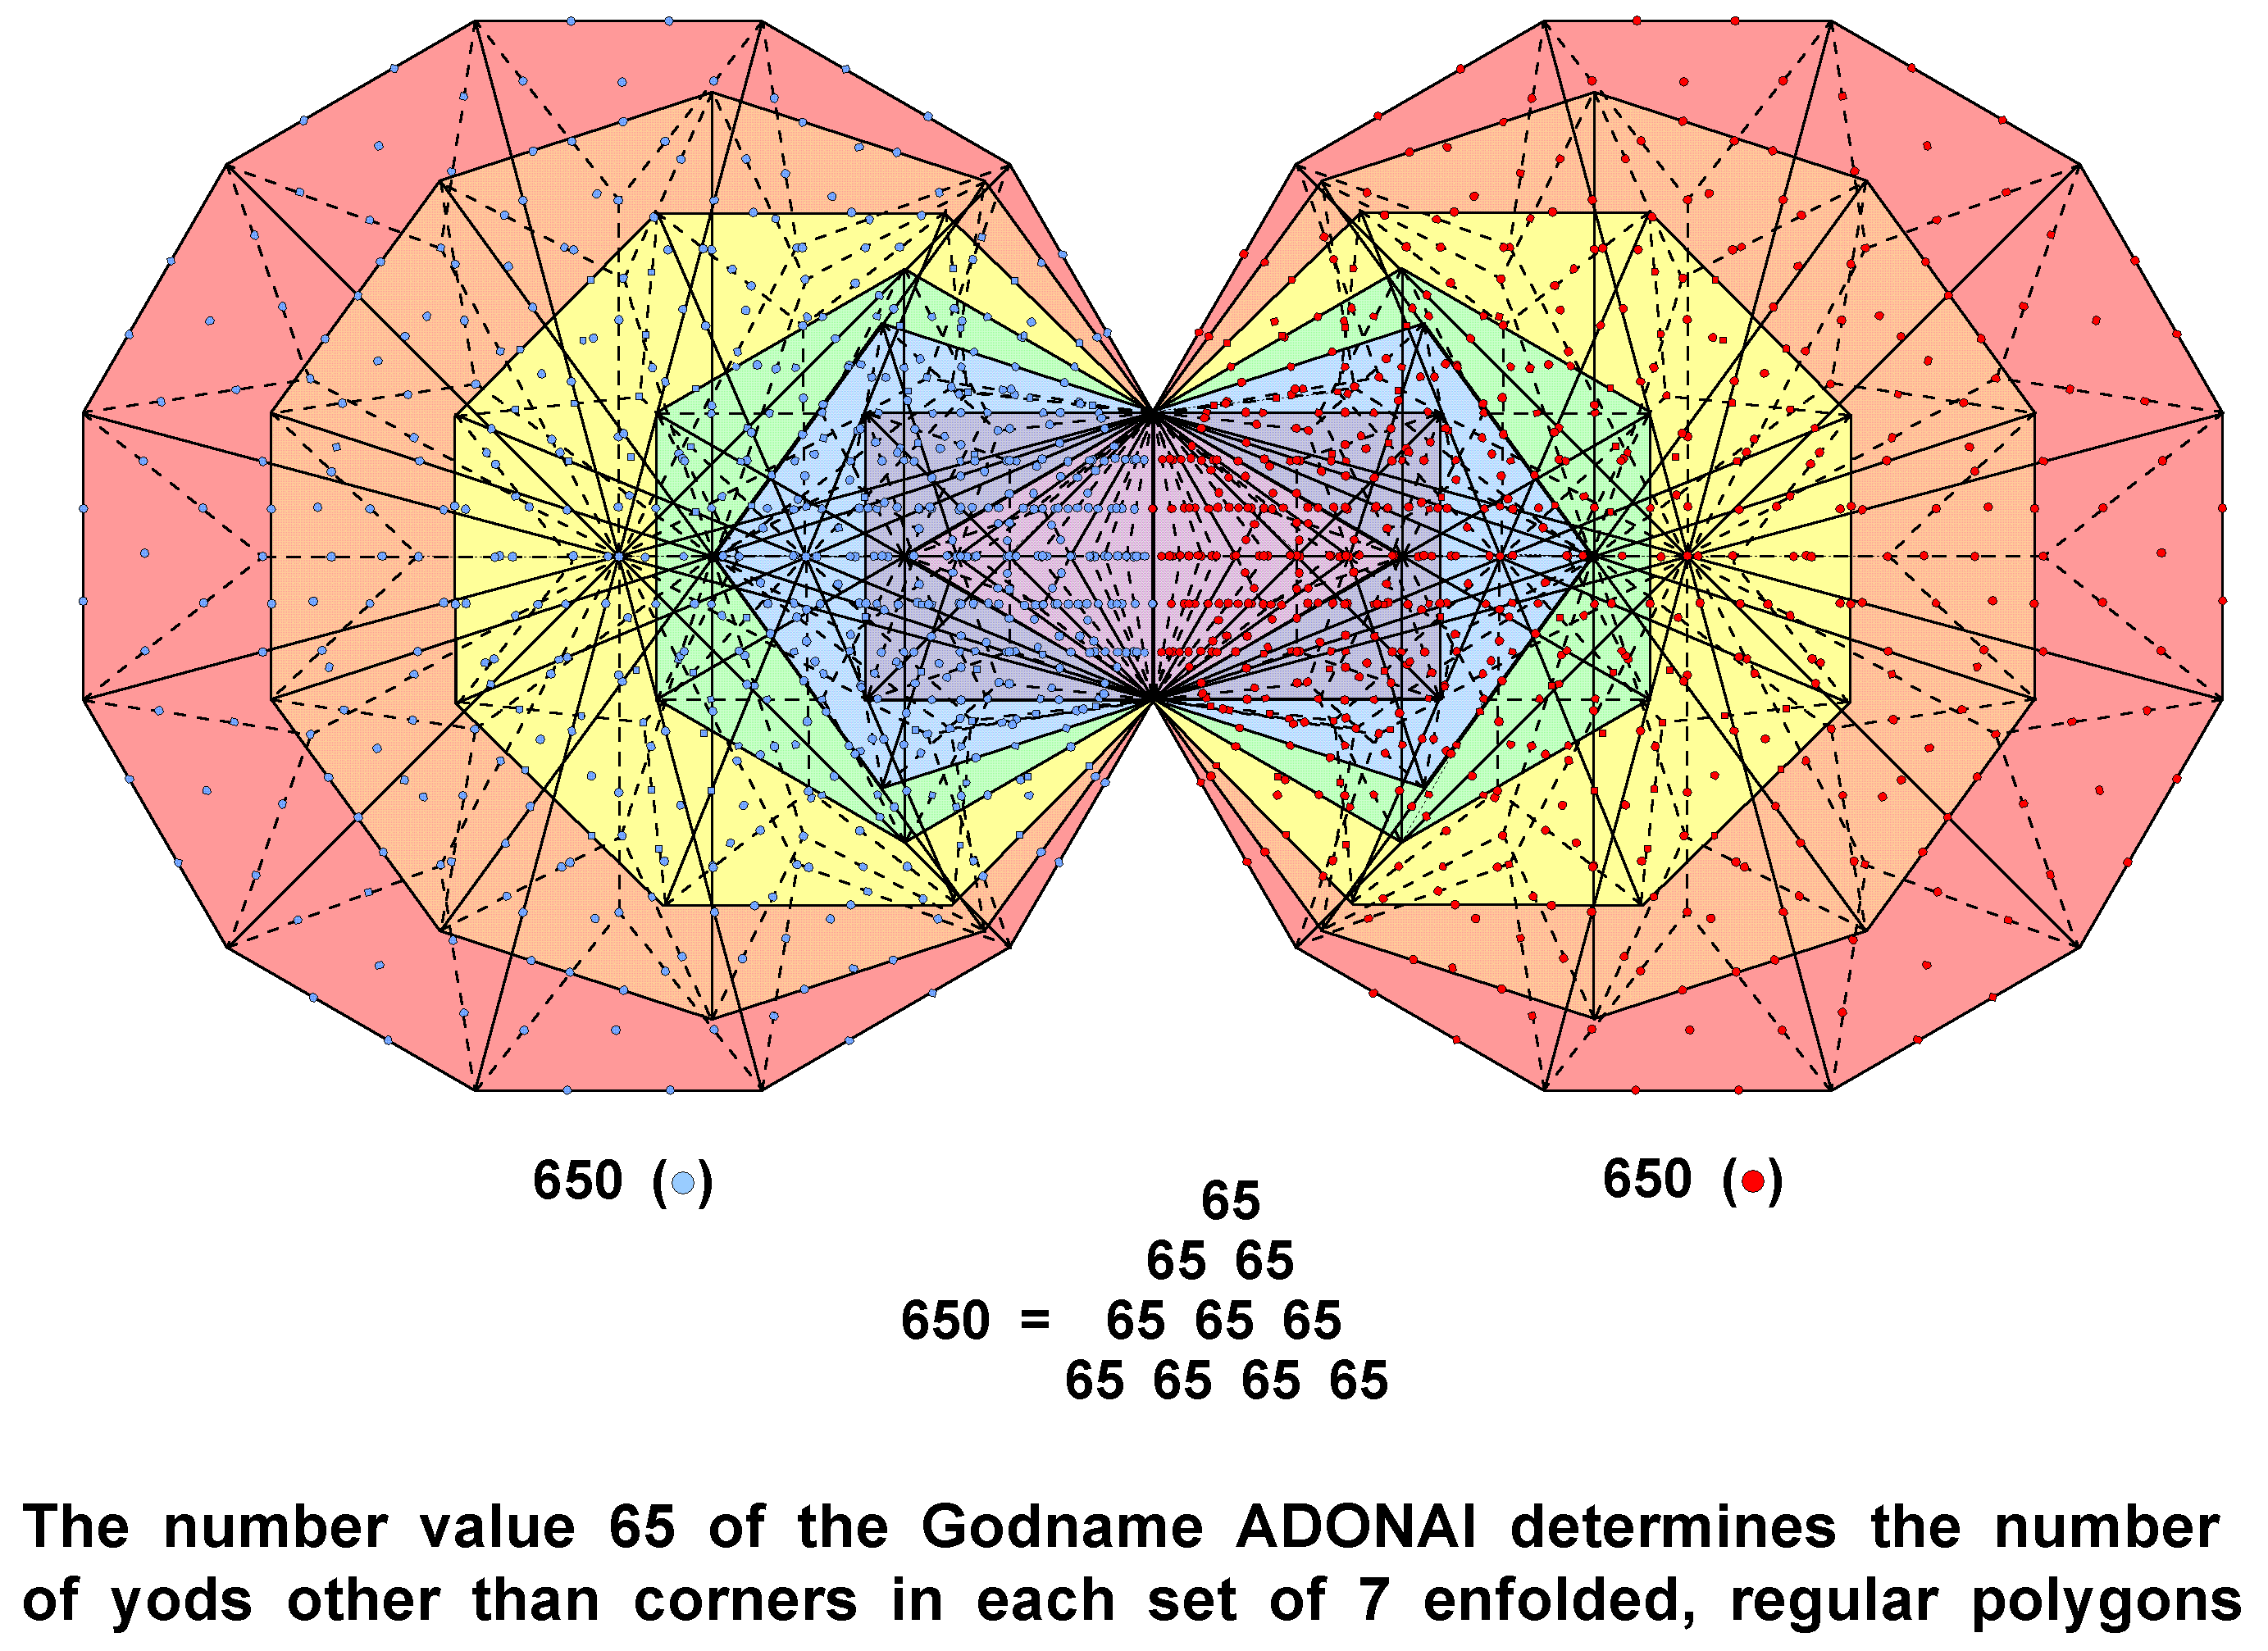 650 yods not corners in 7 enfolded Type B polygons